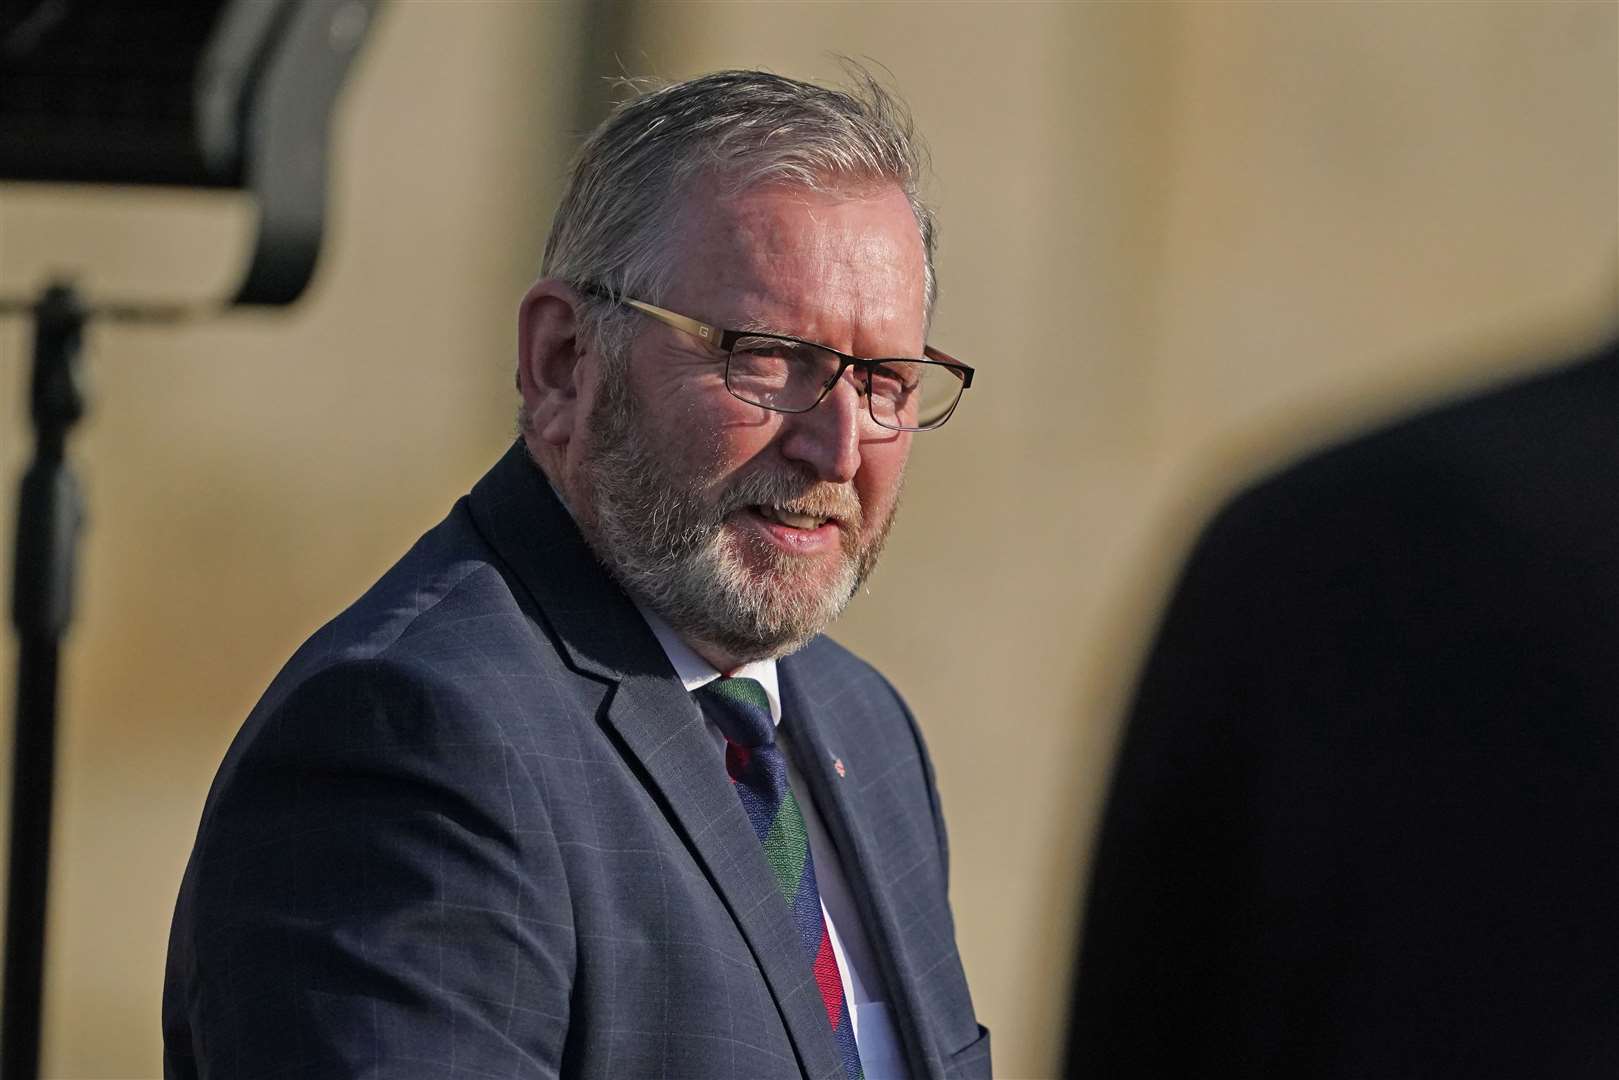 Ulster Unionist Party leader Doug Beattie (Brian Lawless)